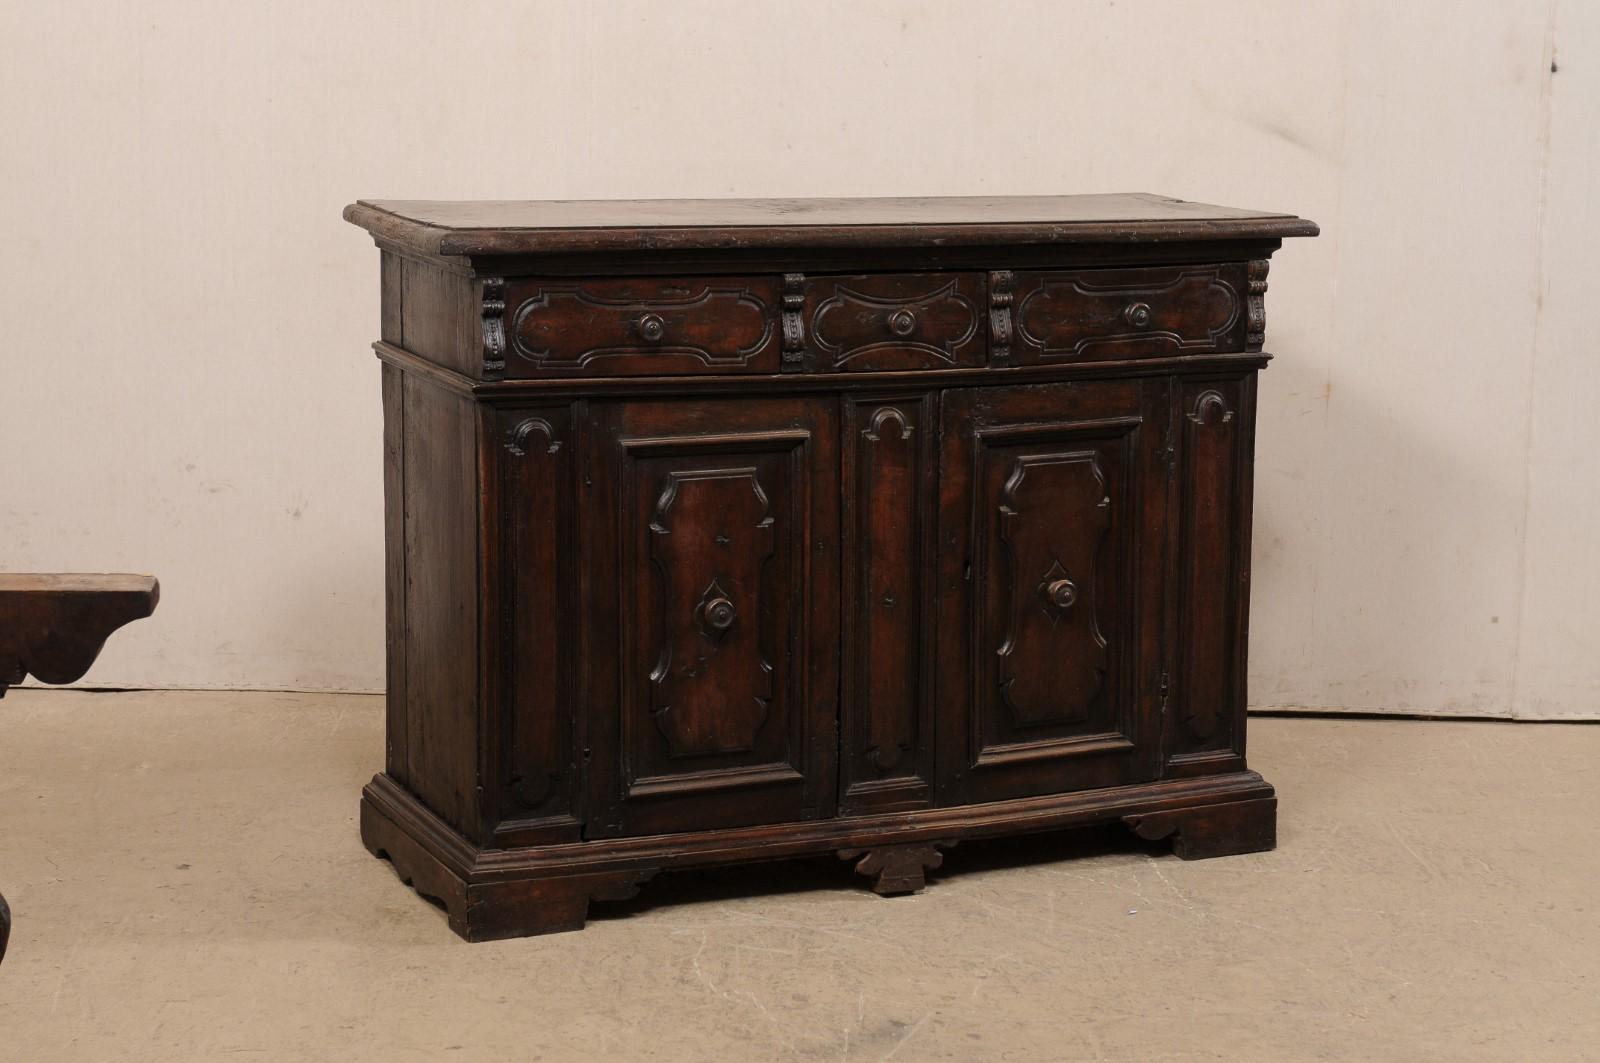 An Italian carved walnut wood buffet credenza from the 18th century. This antique sideboard from Italy features rich walnut wood which has been carved with raised decorative cartouche plaques, in varying designs, about the front face. This piece has